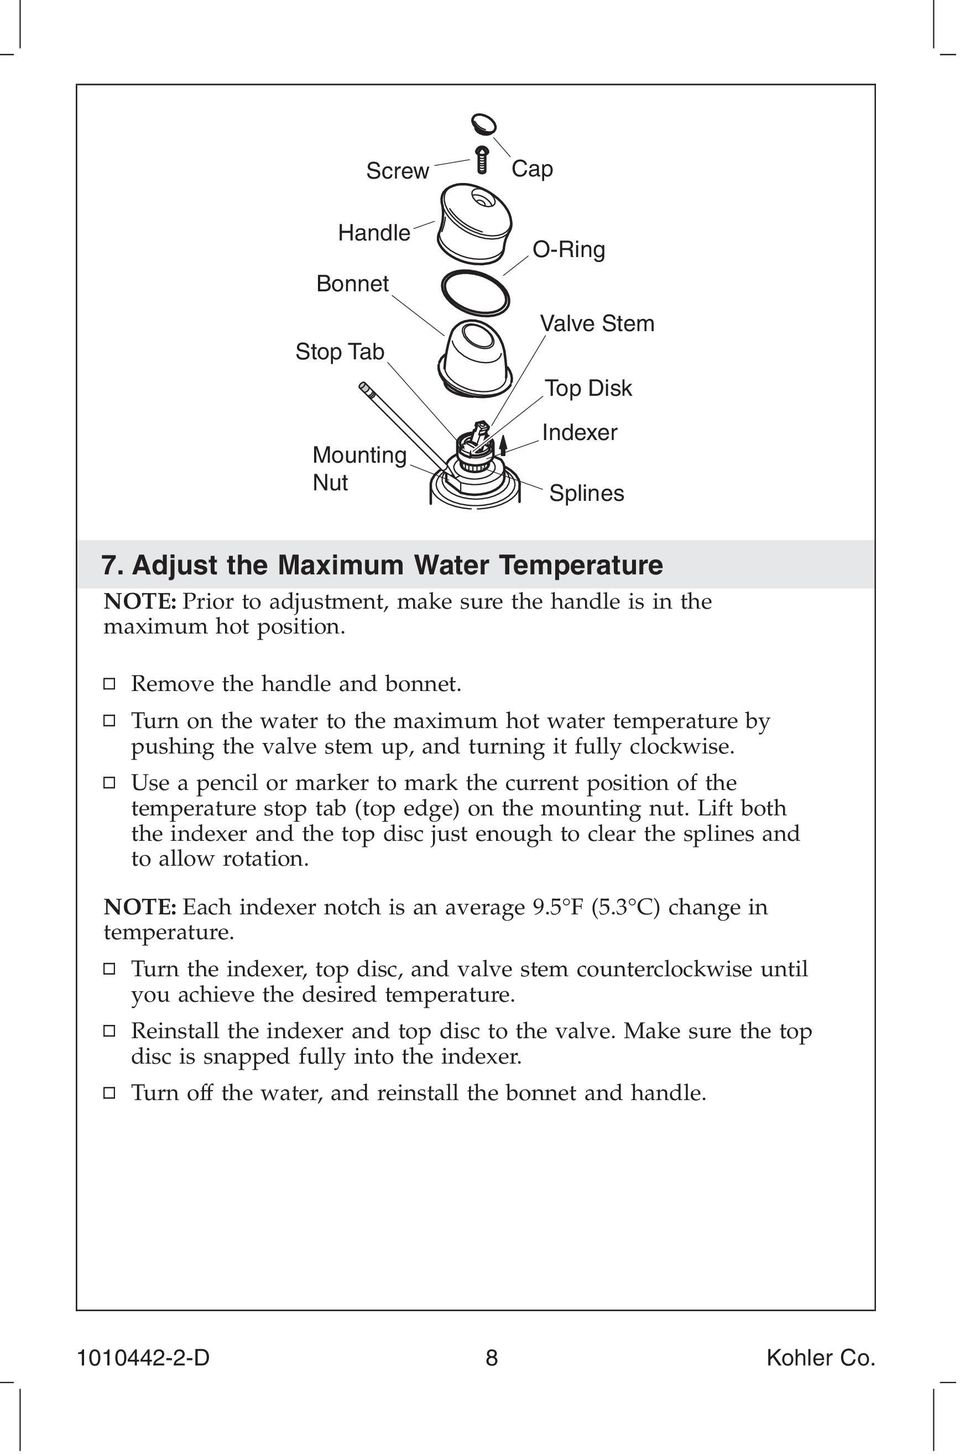 Turn on the water to the maximum hot water temperature by pushing the valve stem up, and turning it fully clockwise.